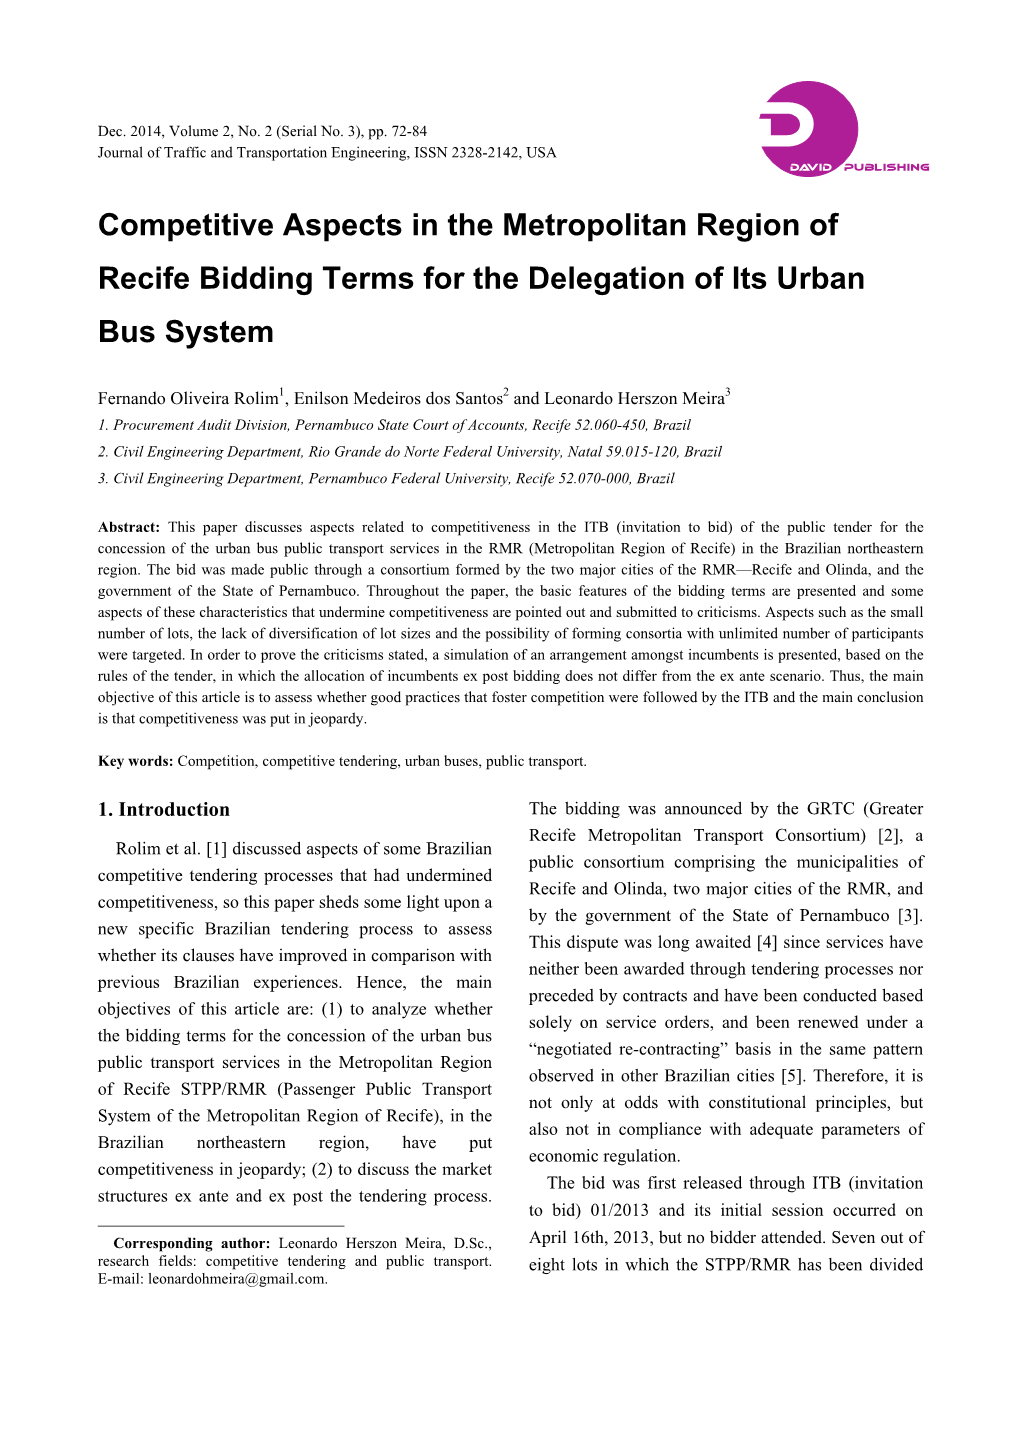 Competitive Aspects in the Metropolitan Region of Recife Bidding Terms for the Delegation of Its Urban Bus System